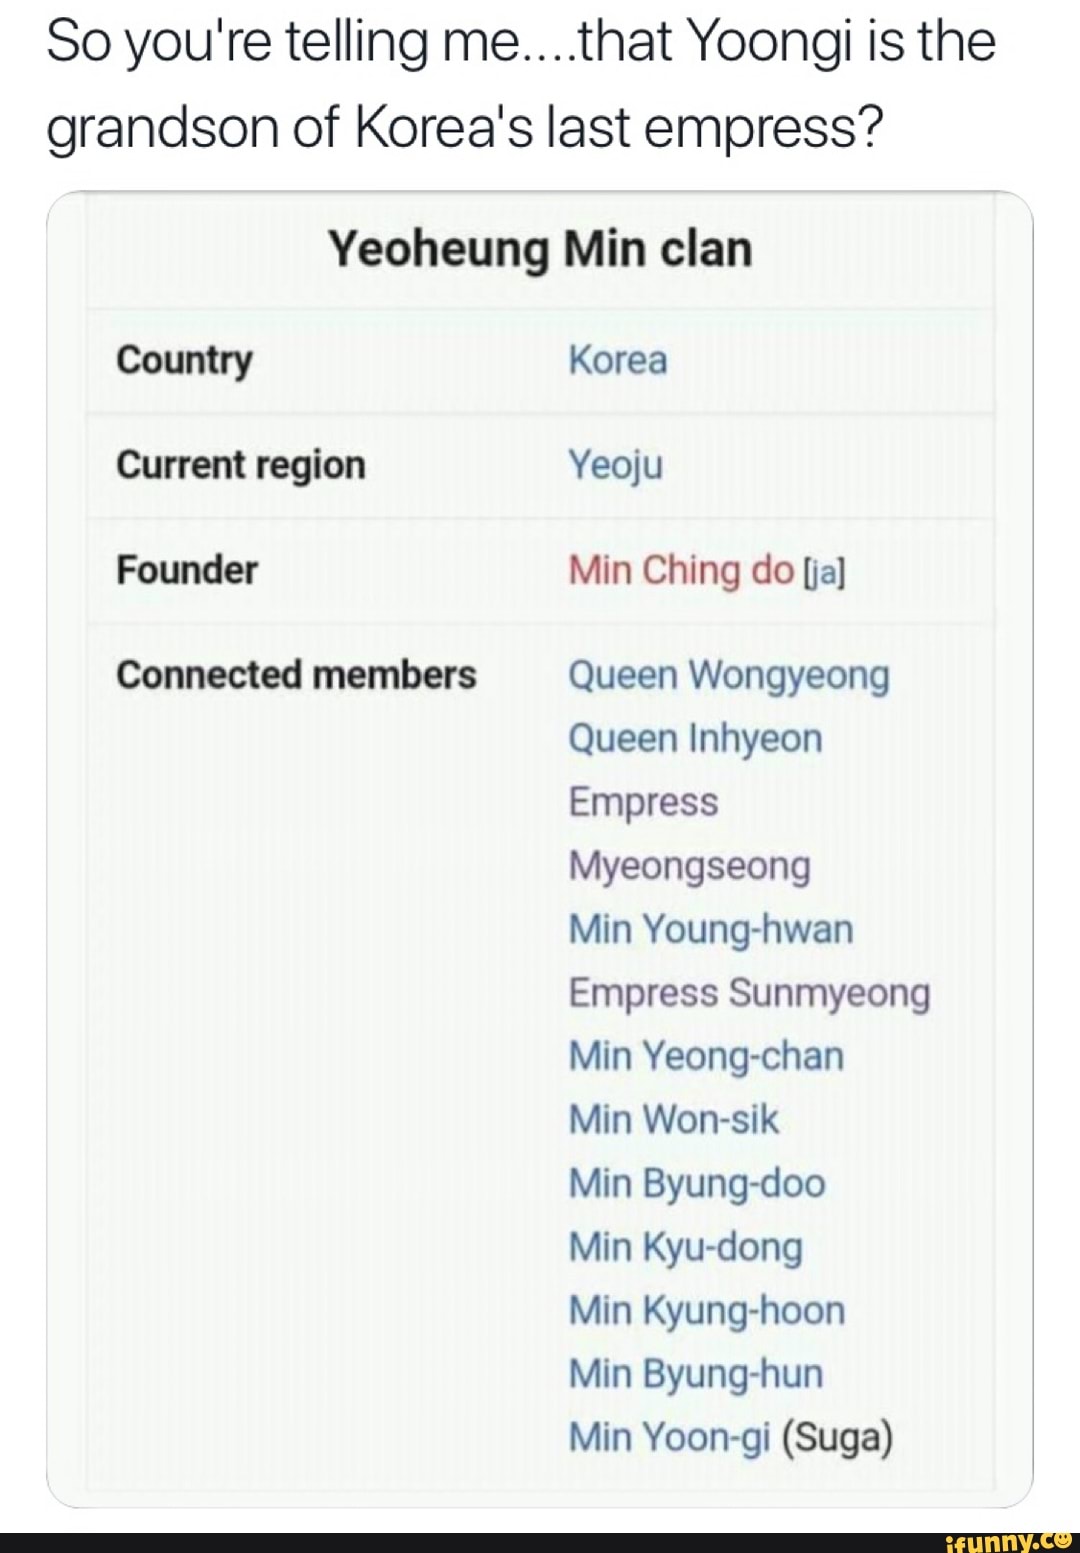 So You Re Telling Me That Yoongi Is The Grandson Of Korea S Last Empress Yeoheung Min Clan Country Current Region Founder Connected Members Korea Yeoju Min Ching Do Ja Queen Wongyeong Queen Inhyeon Empress Unfortunately, it has been interspersed with a lot of distorted historical facts. grandson of korea s last empress